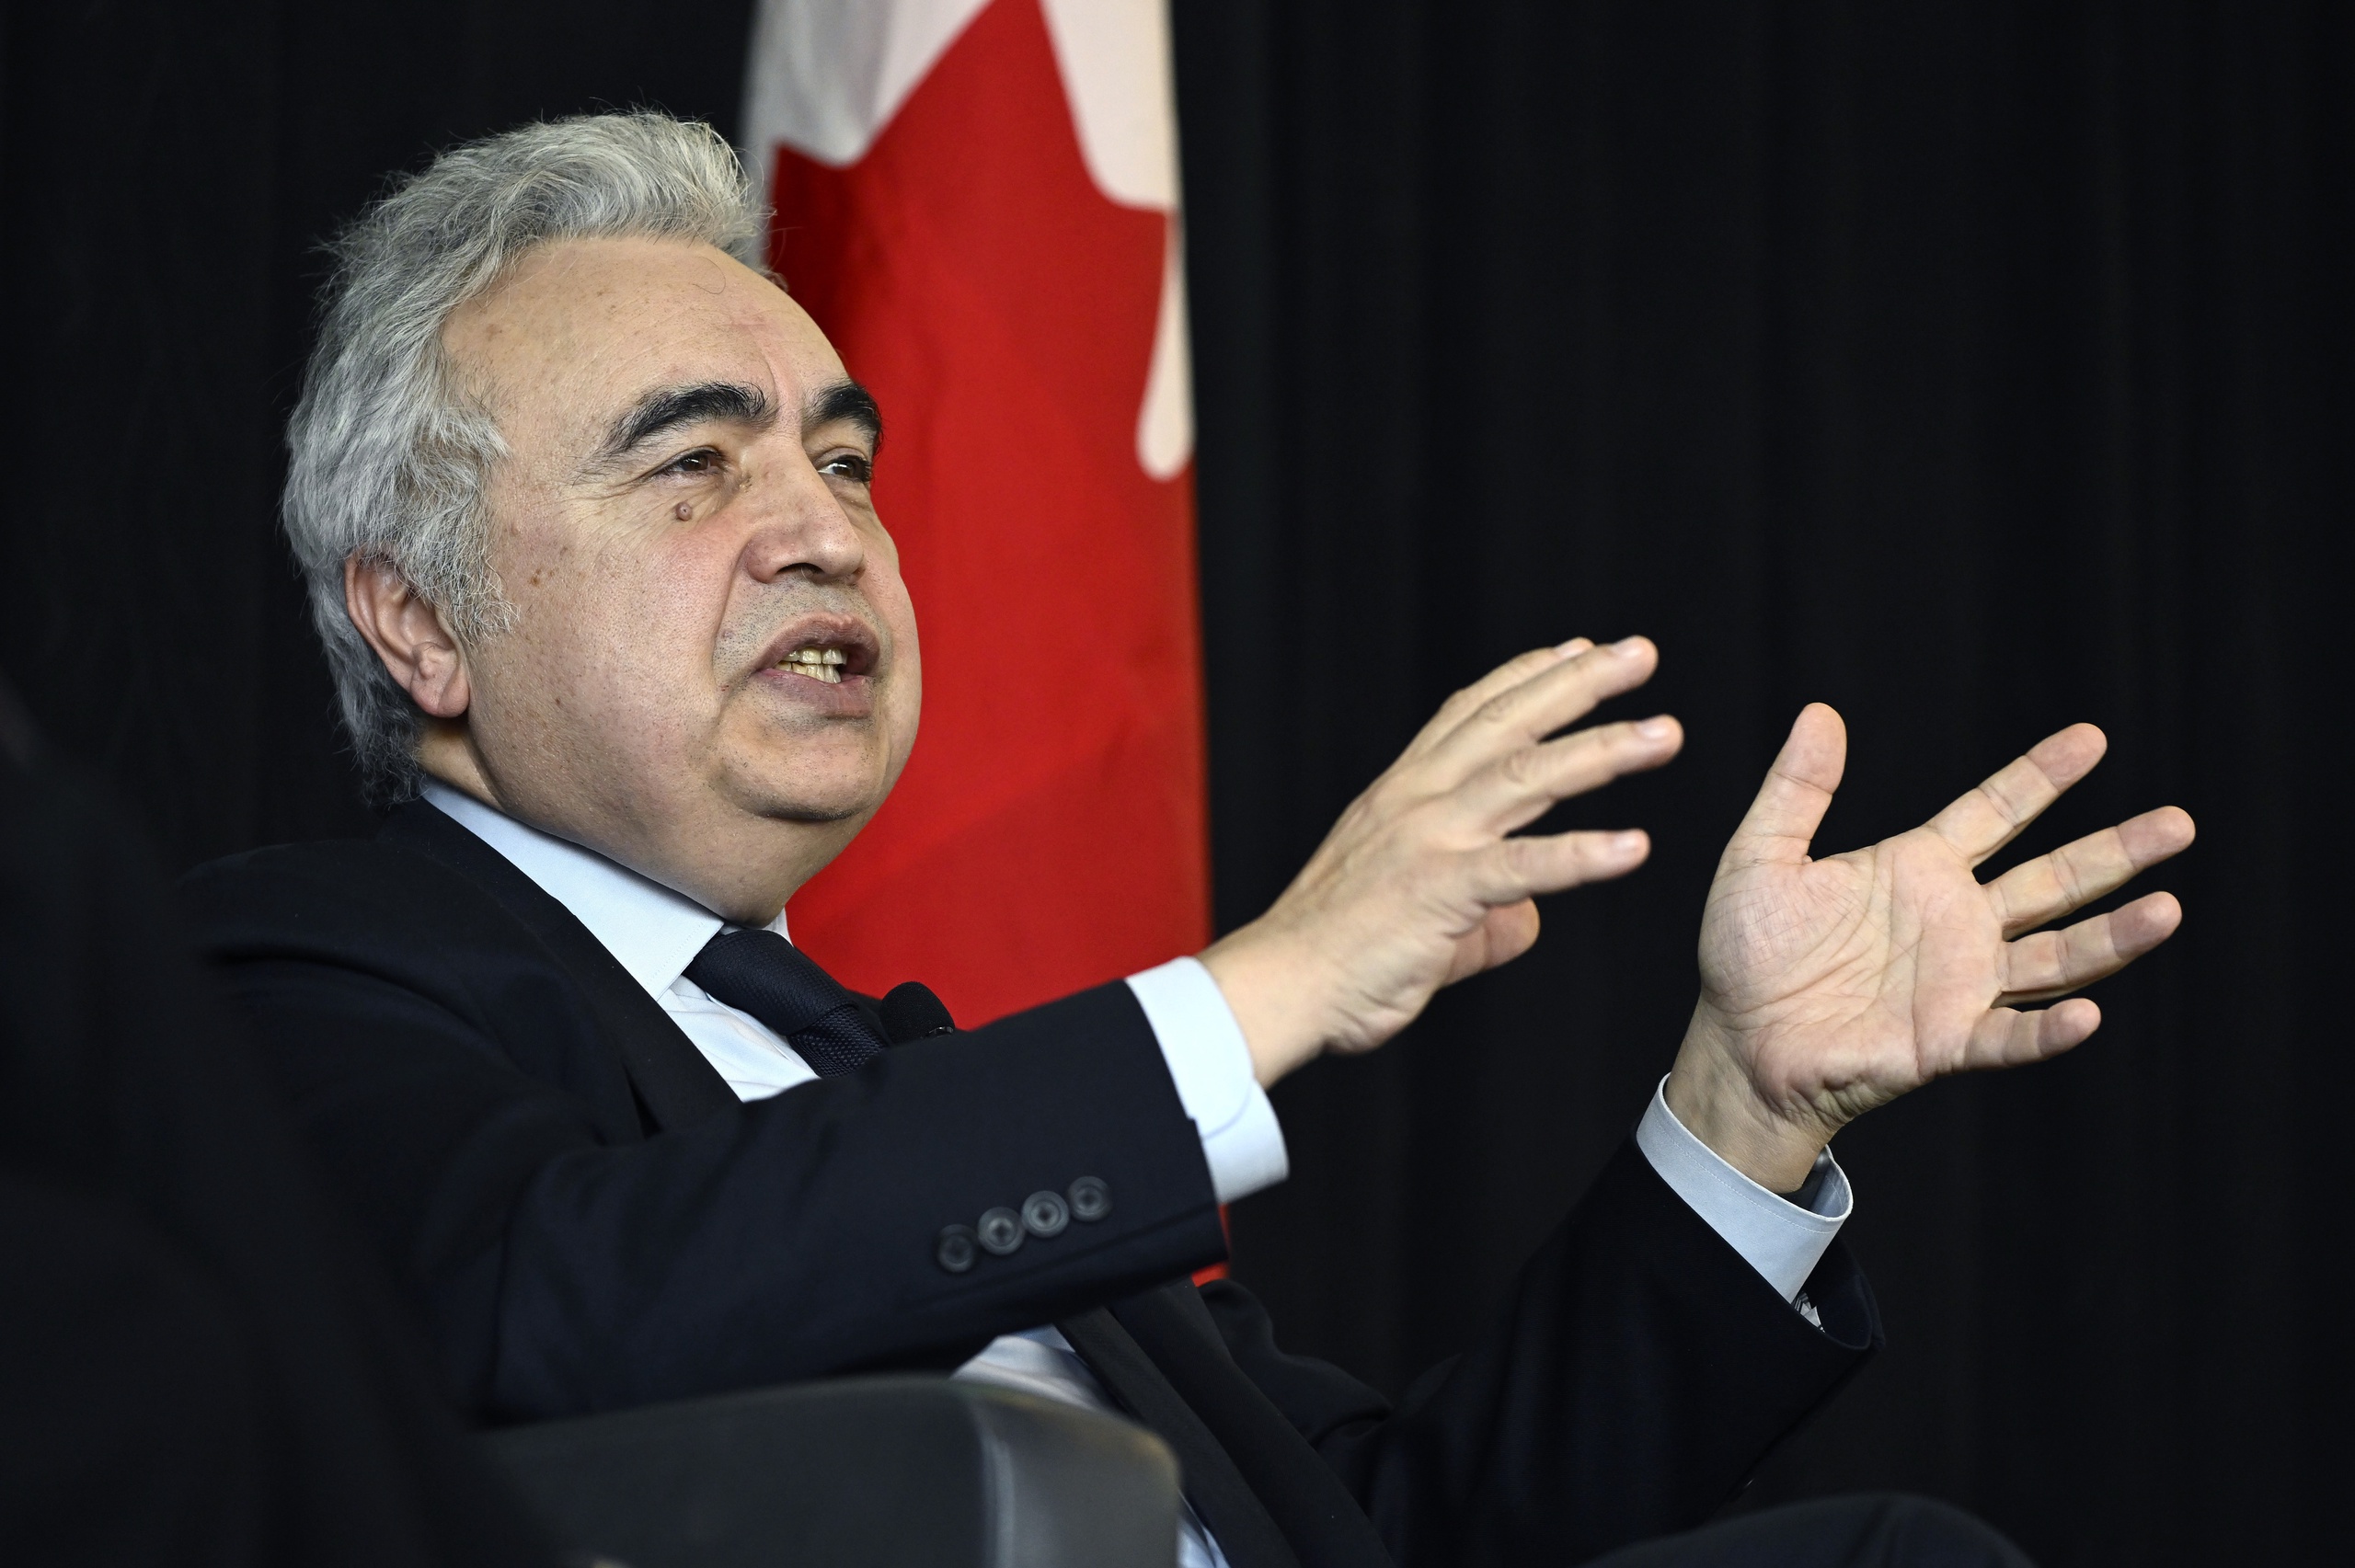 Dr. Fatih Birol, Executive Director of the International Energy Agency participates in a fireside discussion in Ottawa, on Wednesday, Feb. 1, 2023. THE CANADIAN PRESS/Justin Tang